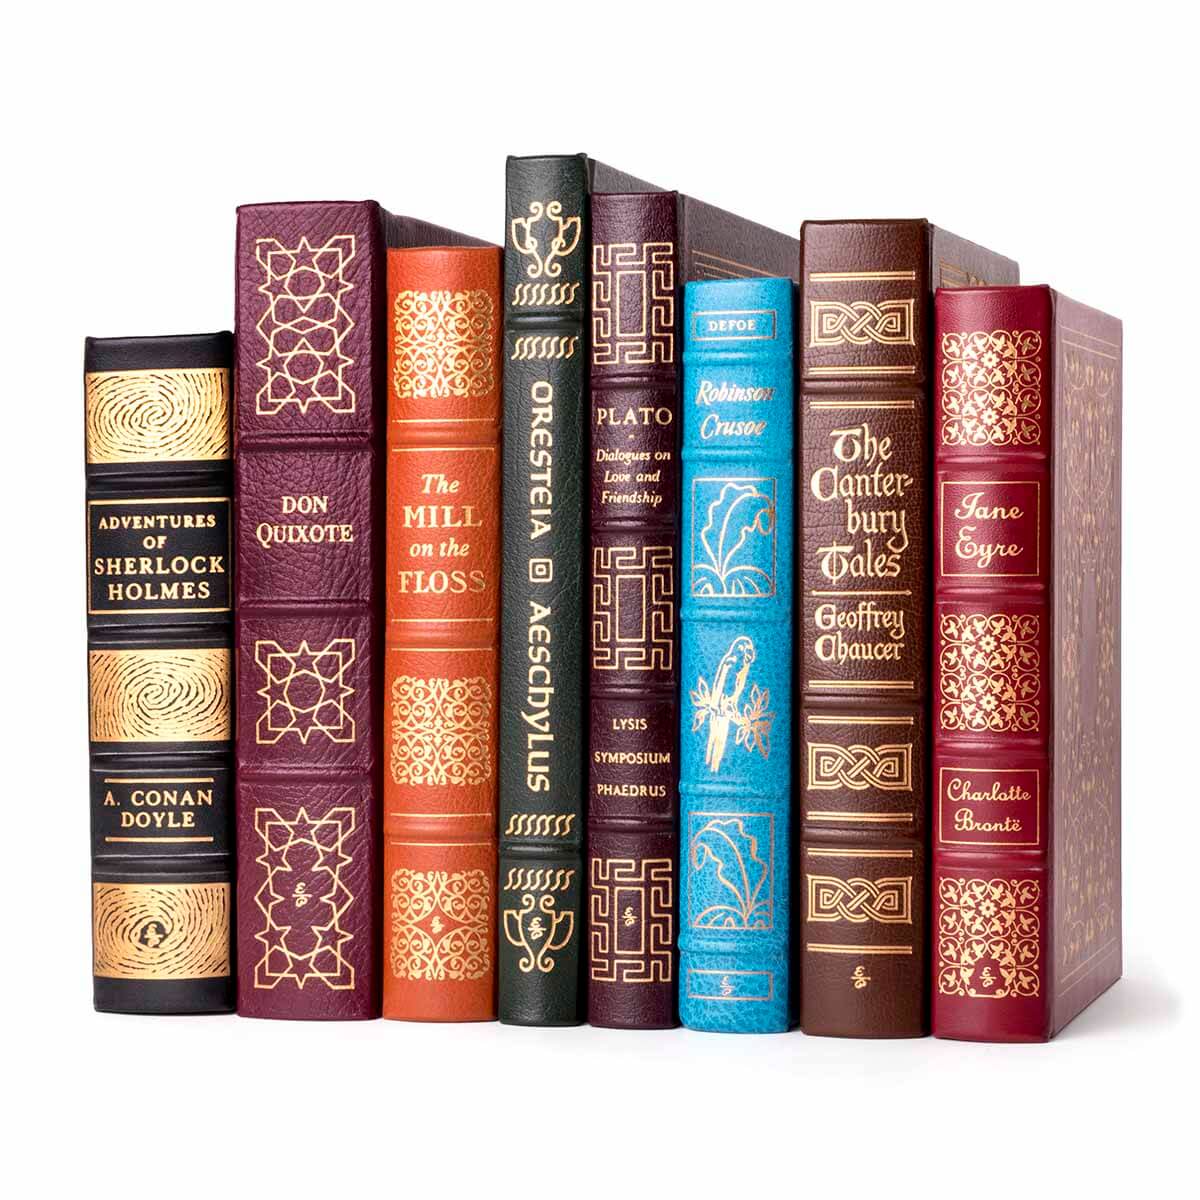 Upgrade your literary collection with Easton Press and The Franklin Library's luxurious leather-bound editions. These classics feature elaborate gilt-decorated bindings, gilded page edges, silk moire endpapers, and a silk page ribbon, making them a stunning addition to any collection.